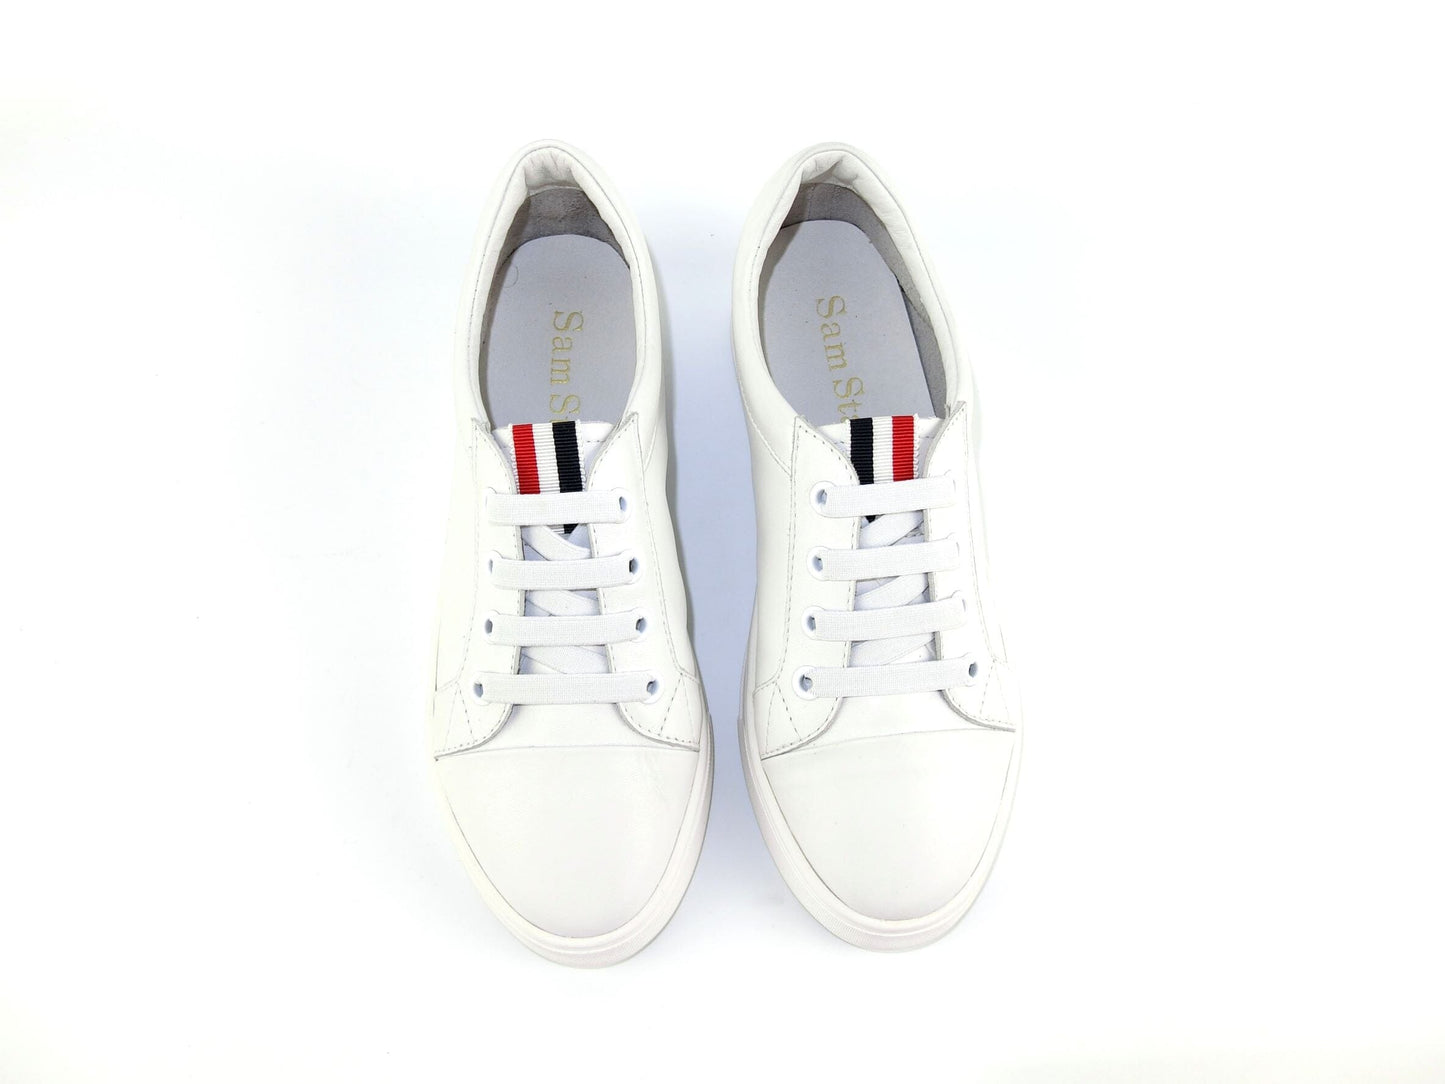 SS22003 Genuine leather sneakers with extra cushions- White with Blue/Red ribbons sneakers Sam Star Shoes 36/3 White blue/red 